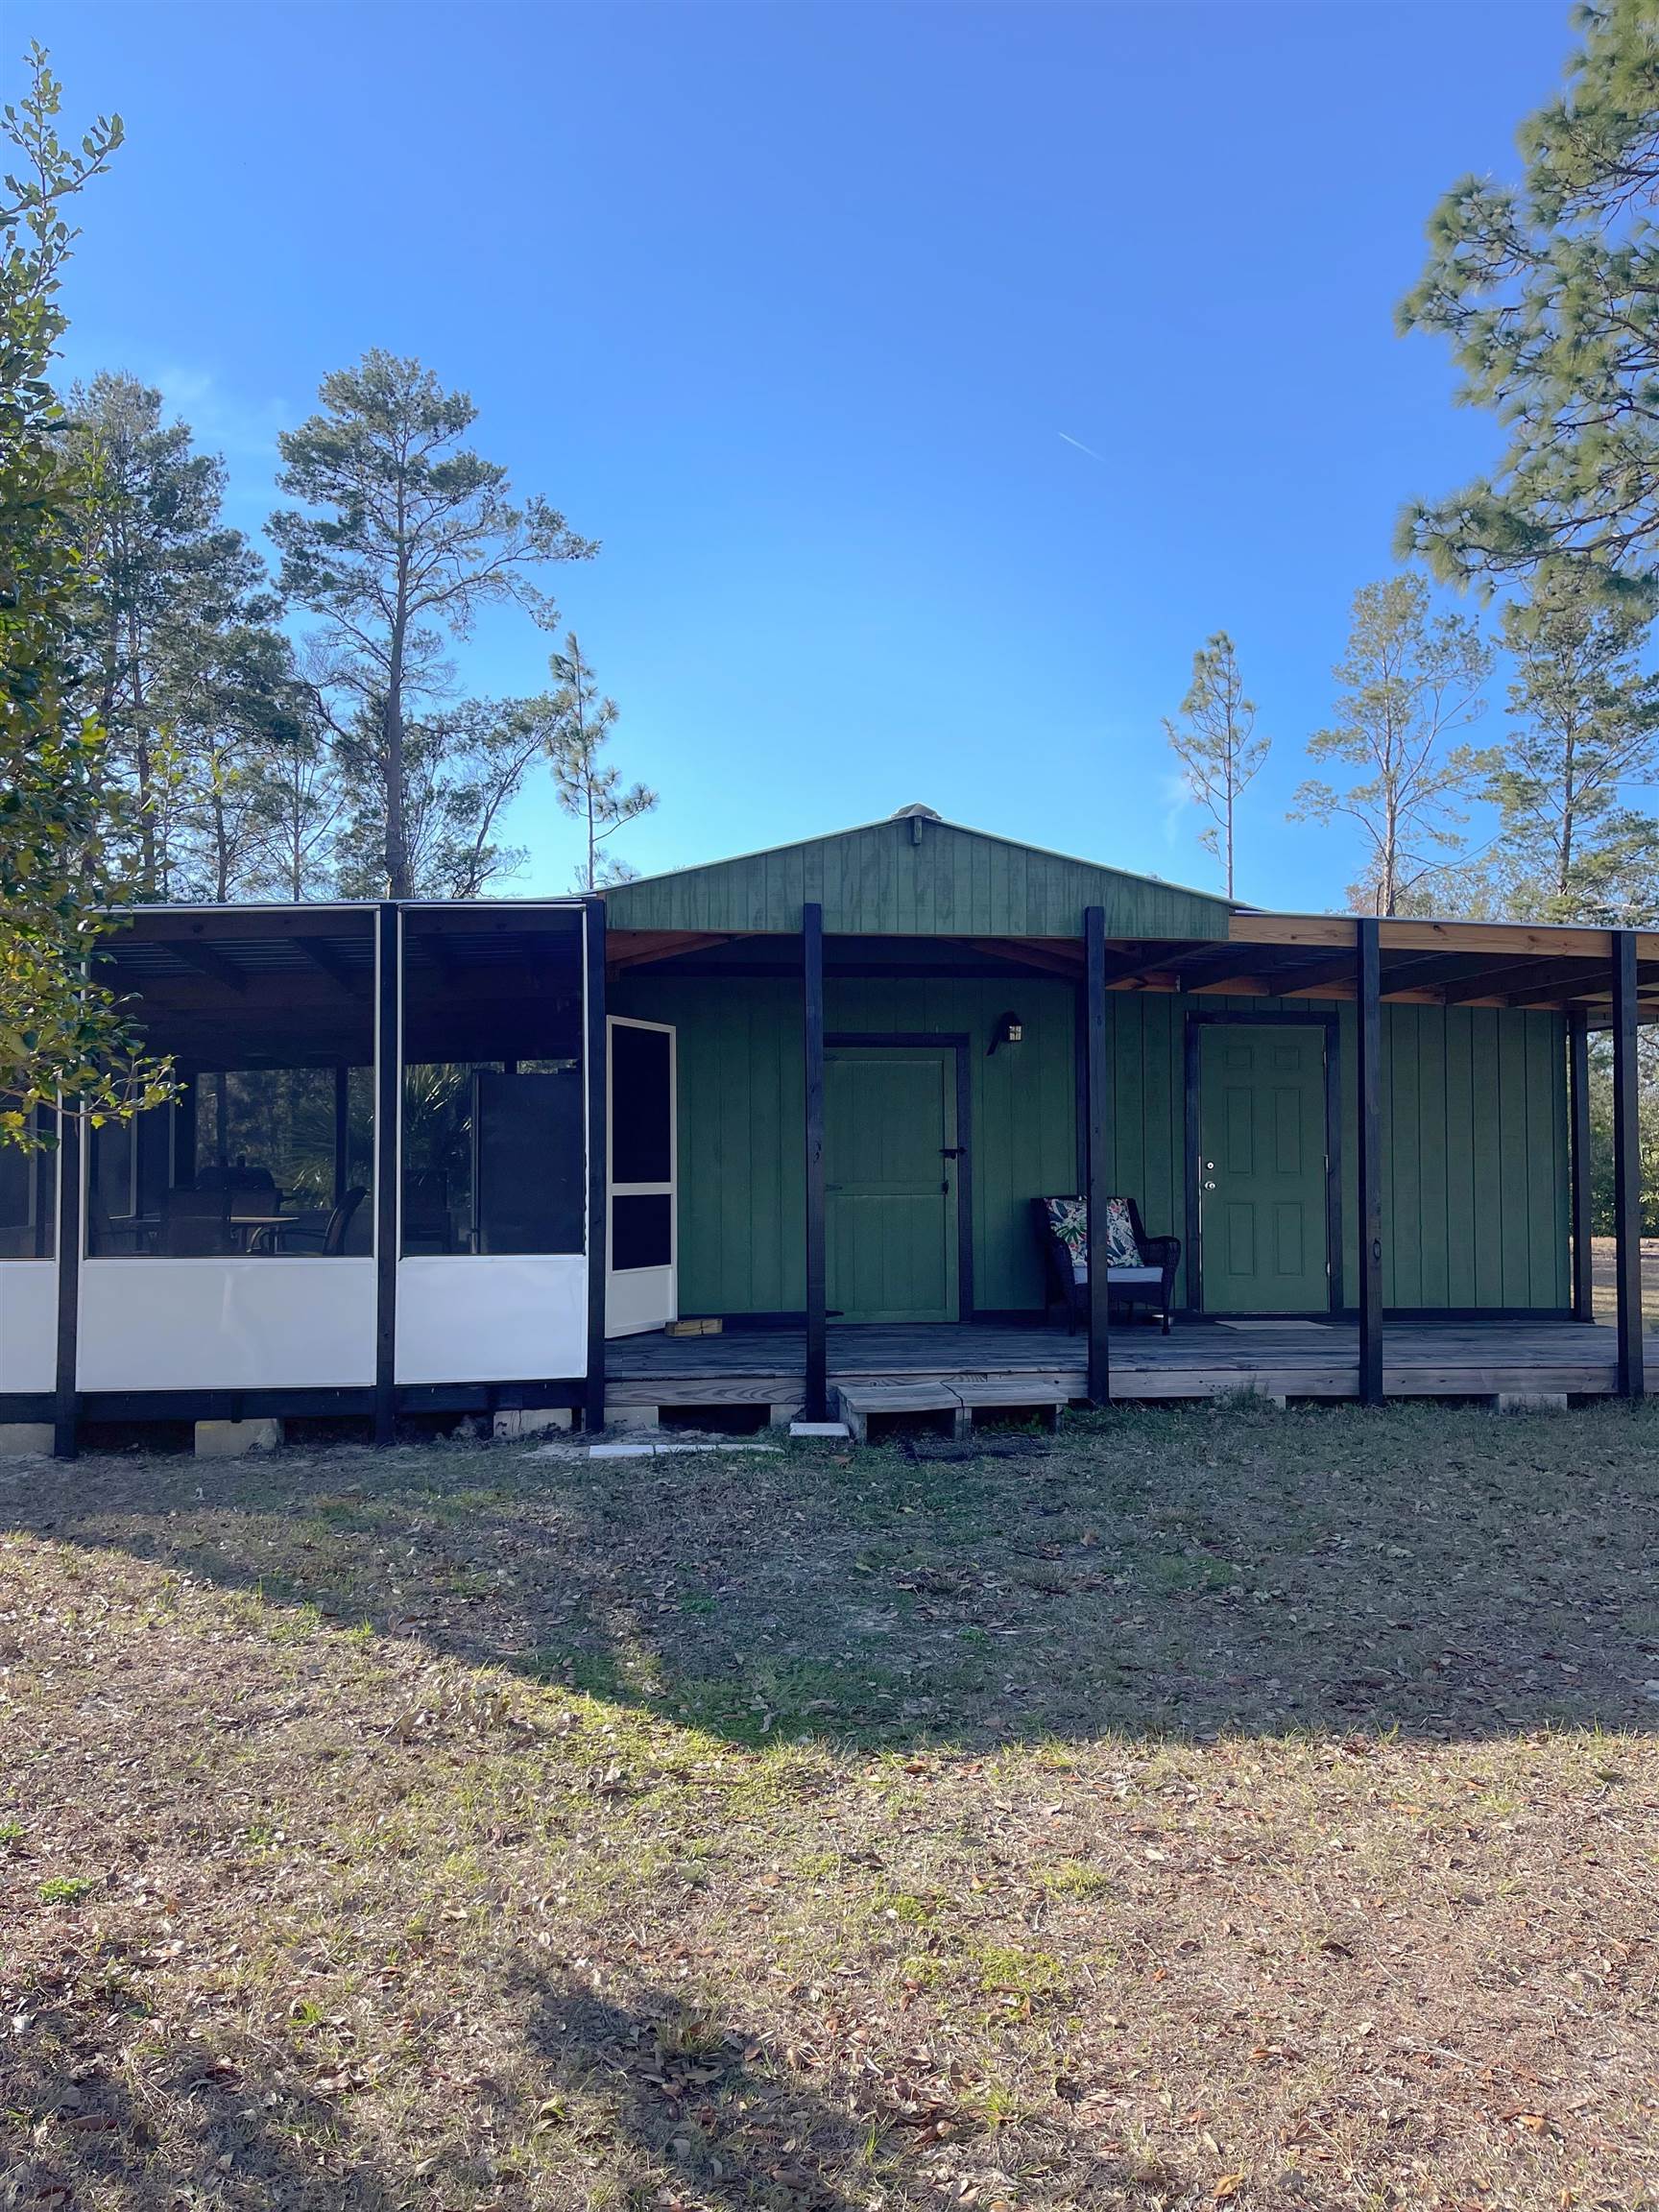 0 Cove,PERRY,Florida 32348,Lots and land,Cove,368405